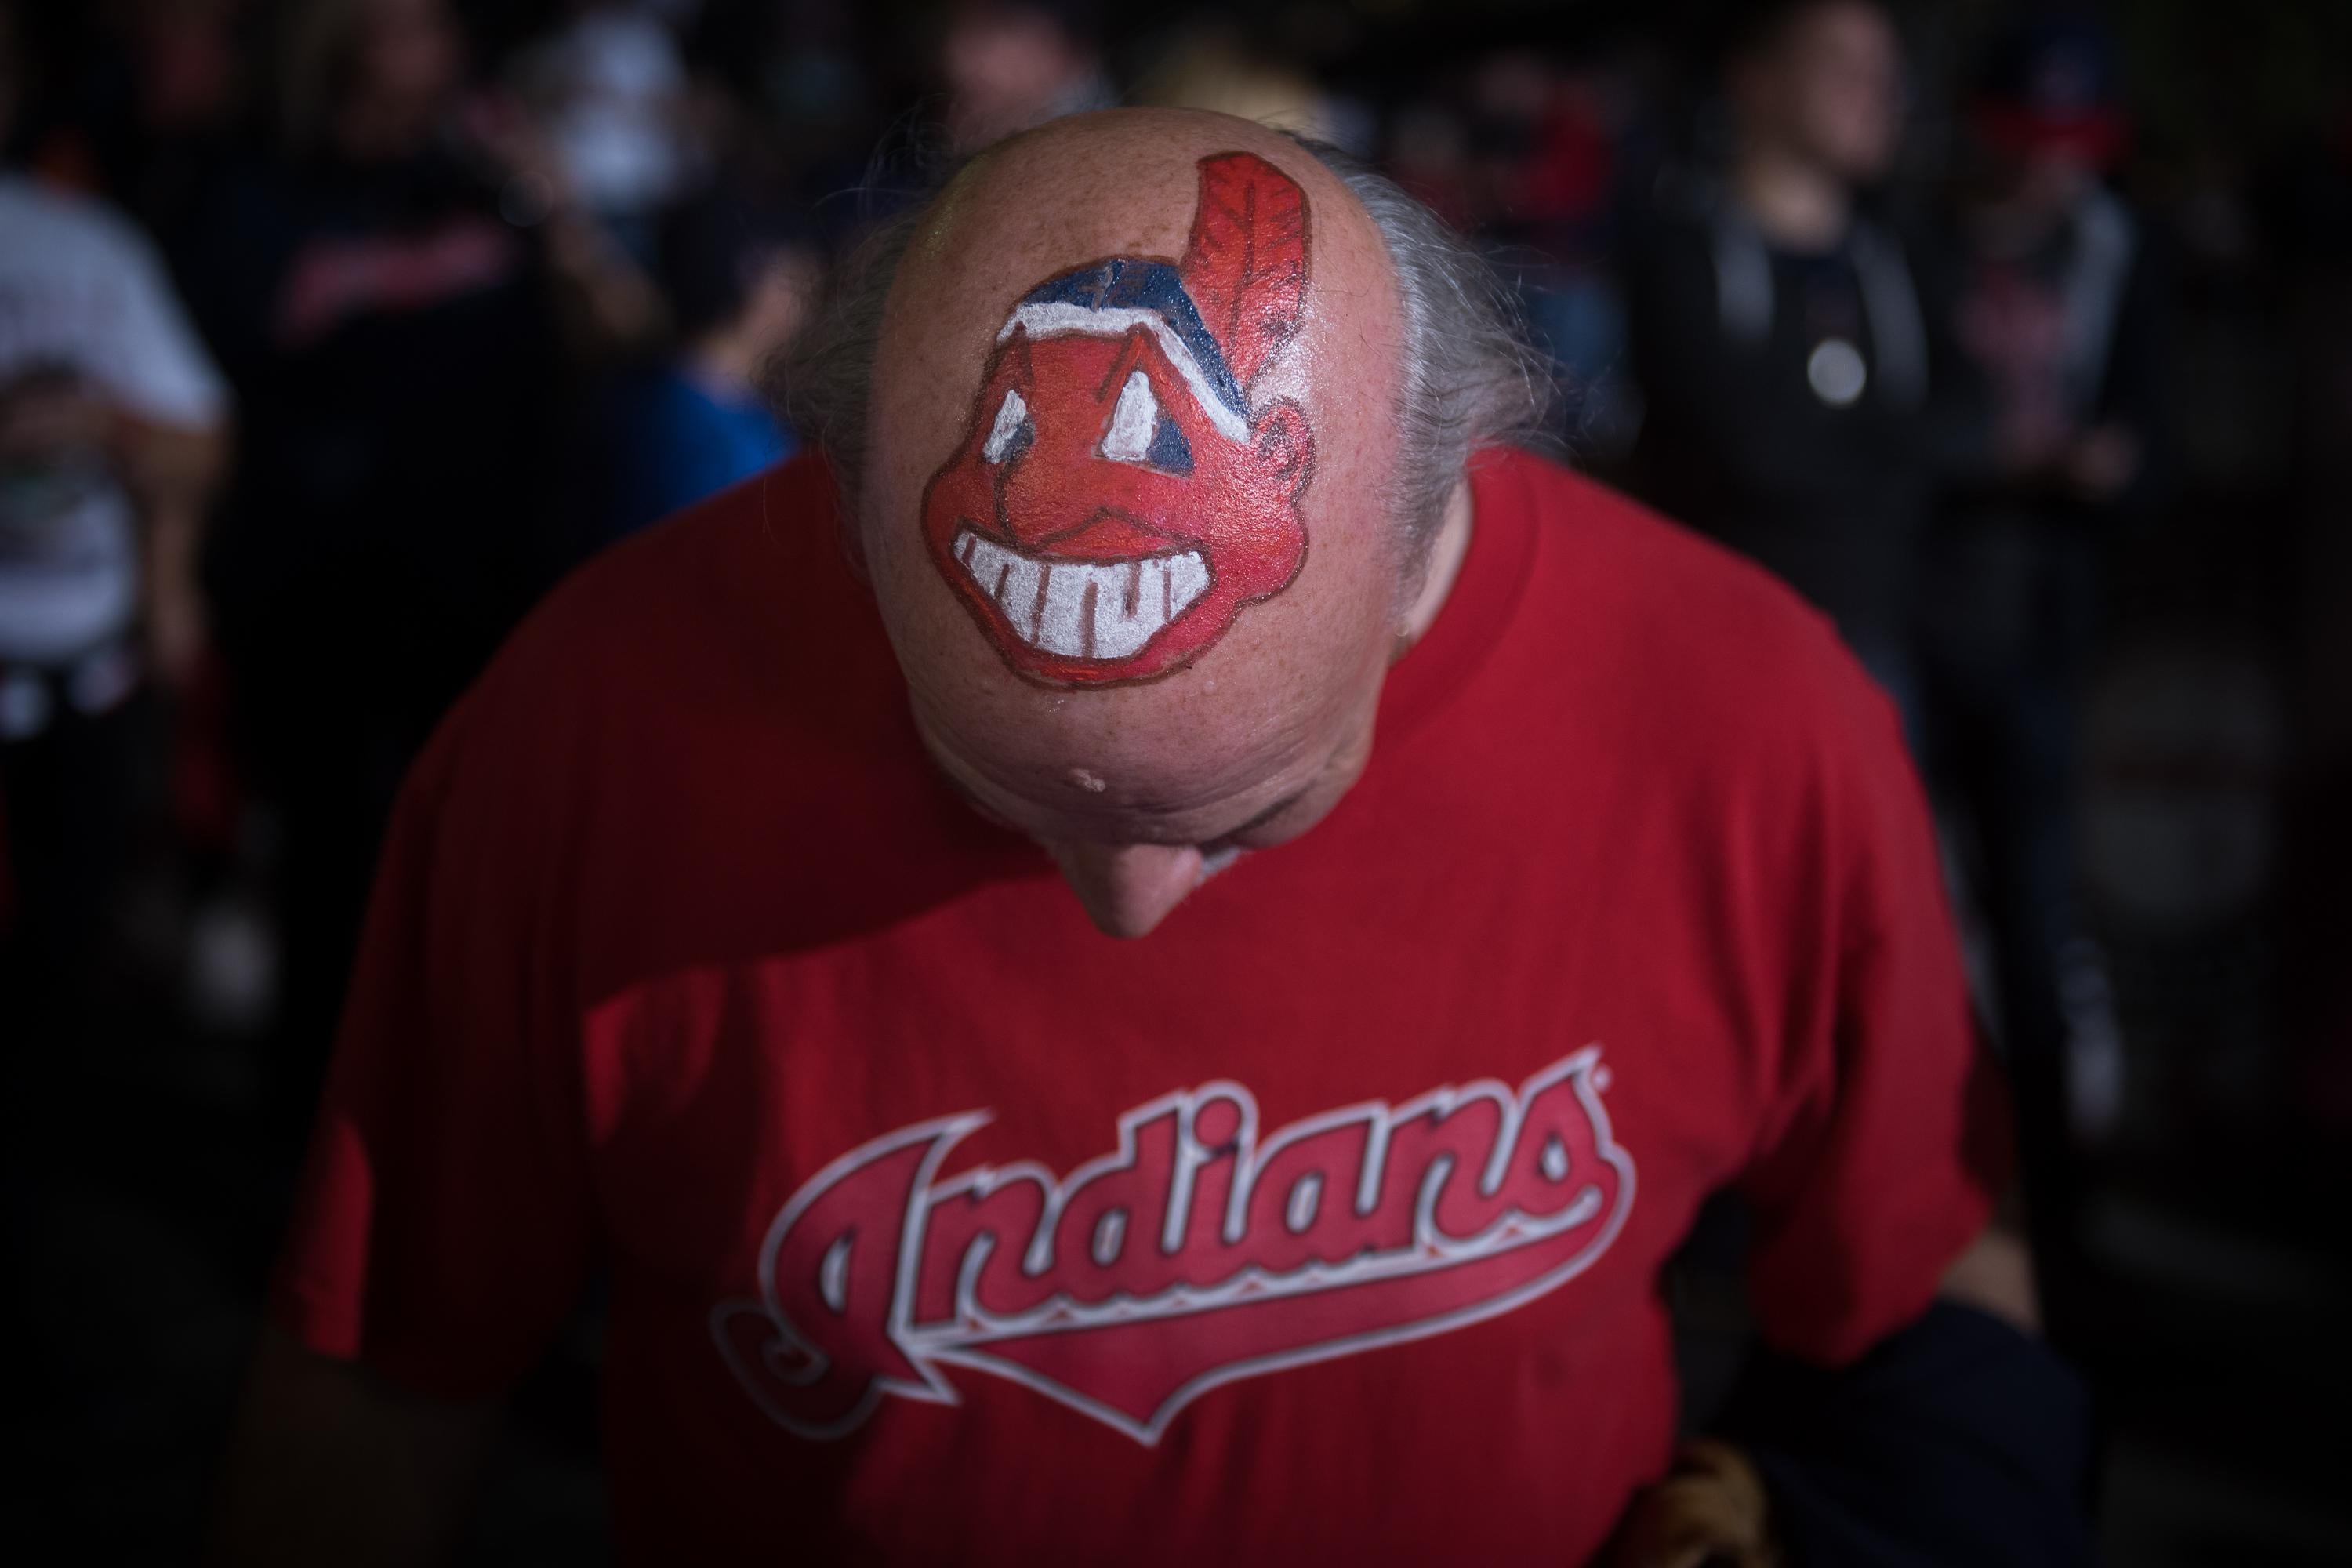 A fan shows off his Cleveland Indians mascot-painted head prior to game 6 of the World Series against the Chicago Cubs on November 1, 2016 in Cleveland, Ohio.